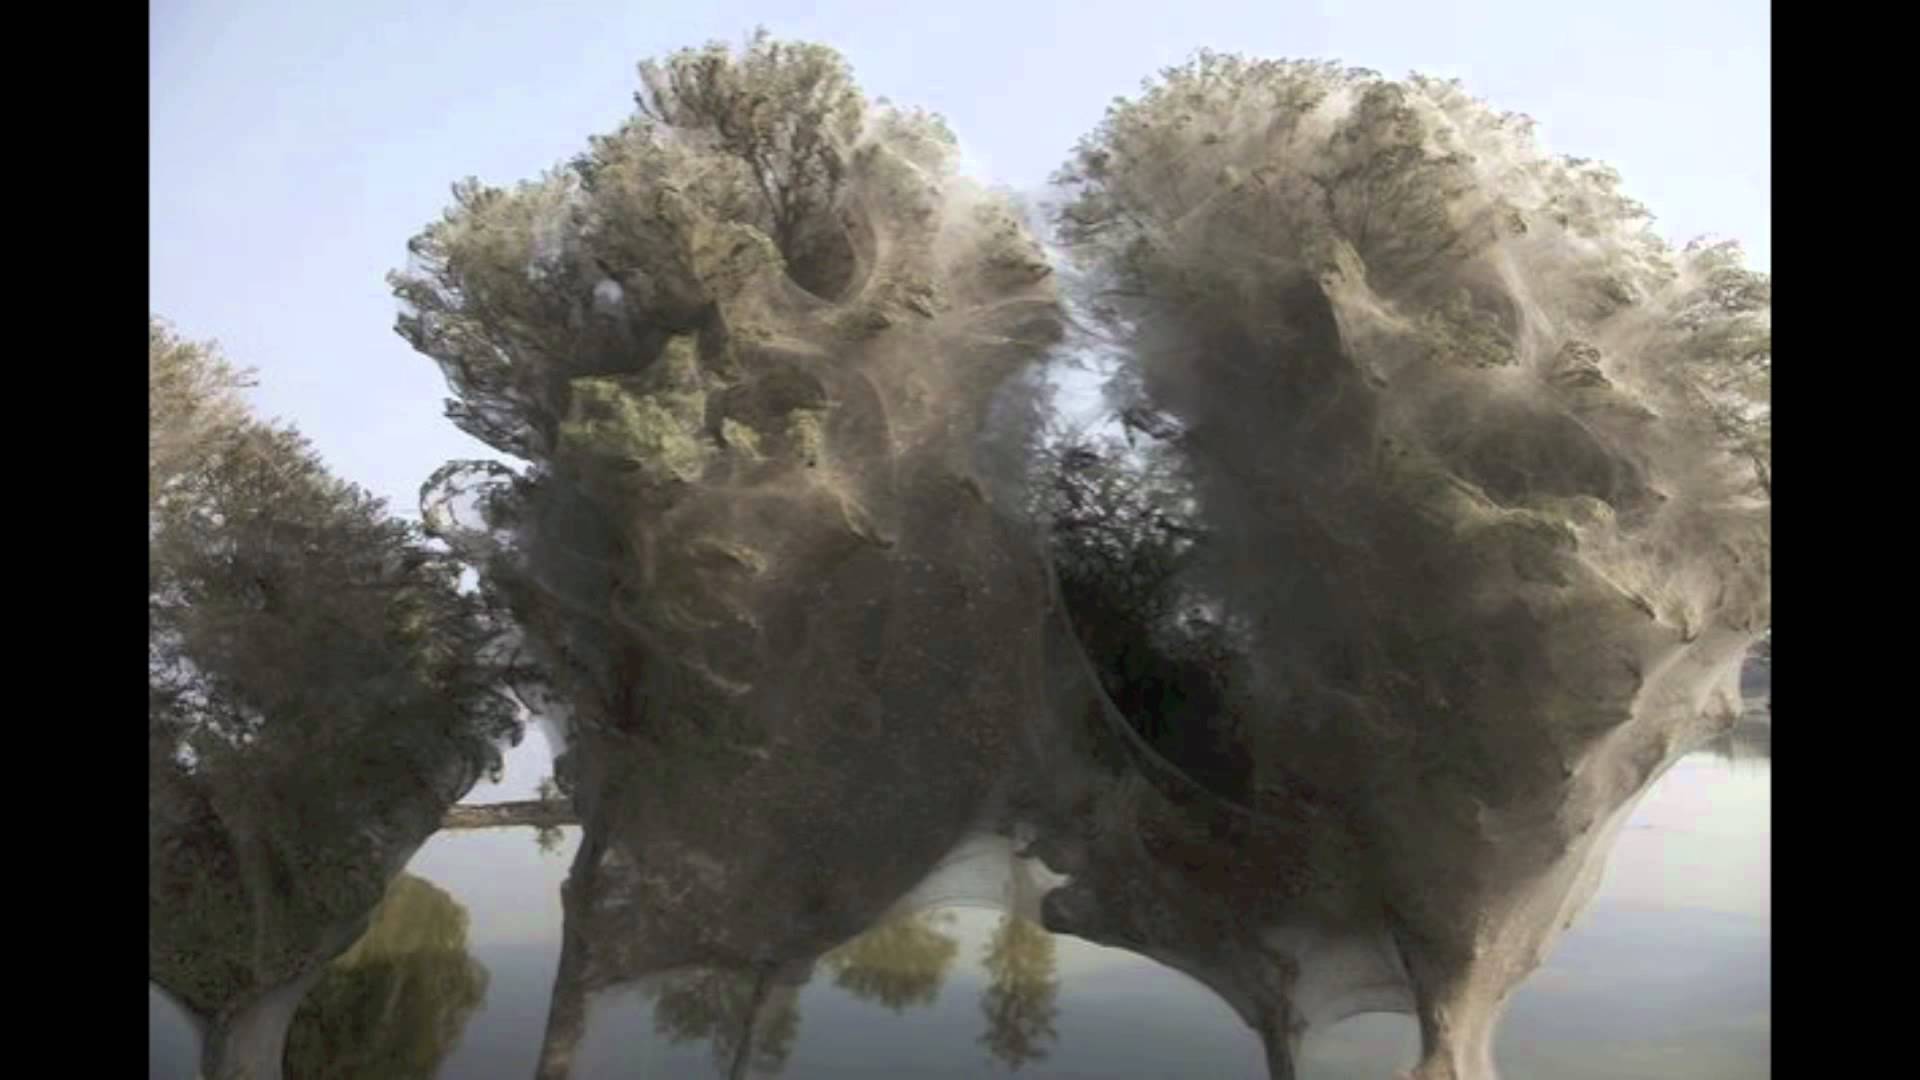 Spider Web Trees after flood in Pakistan - YouTube